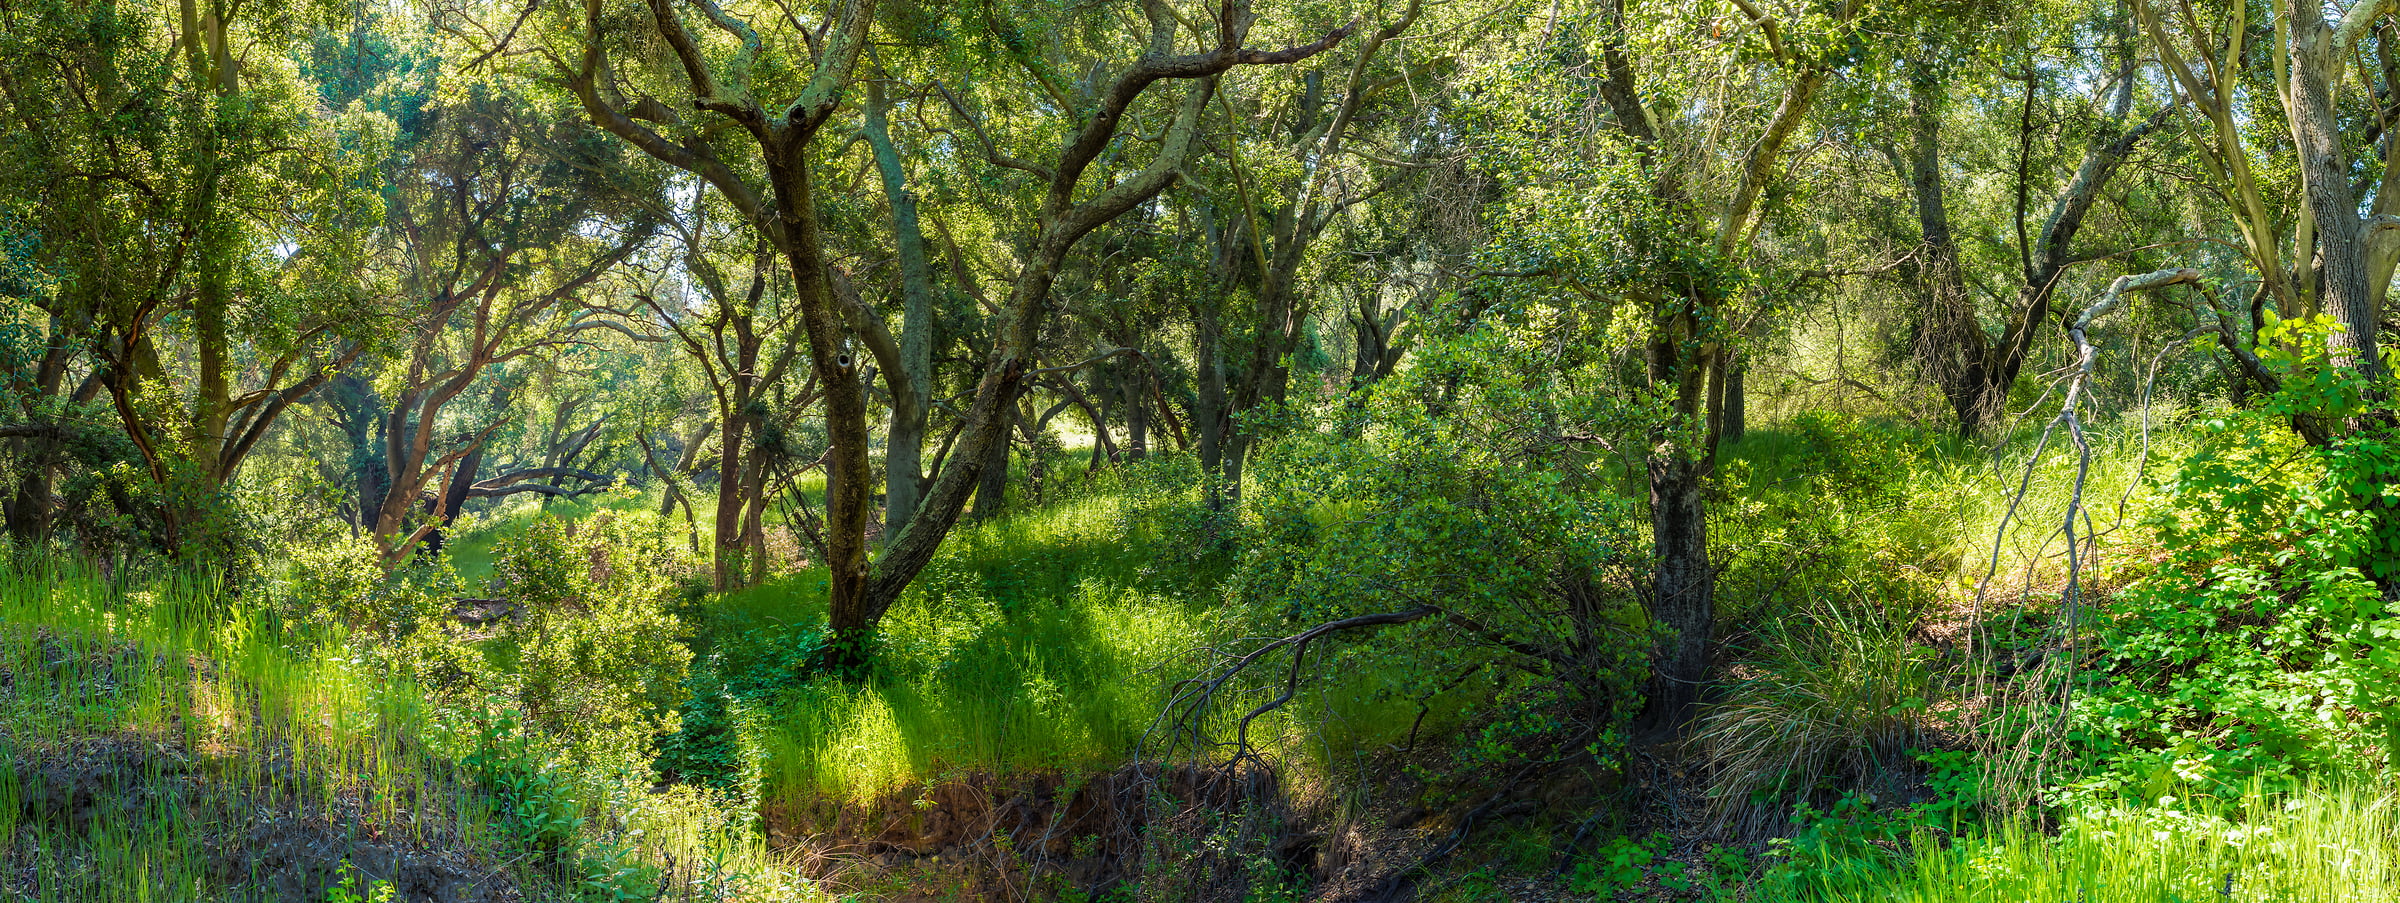 193 megapixels! A very high resolution, large-format VAST photo print of a green nature scene; wallpaper photograph created by Jim Tarpo in Silverado, California.